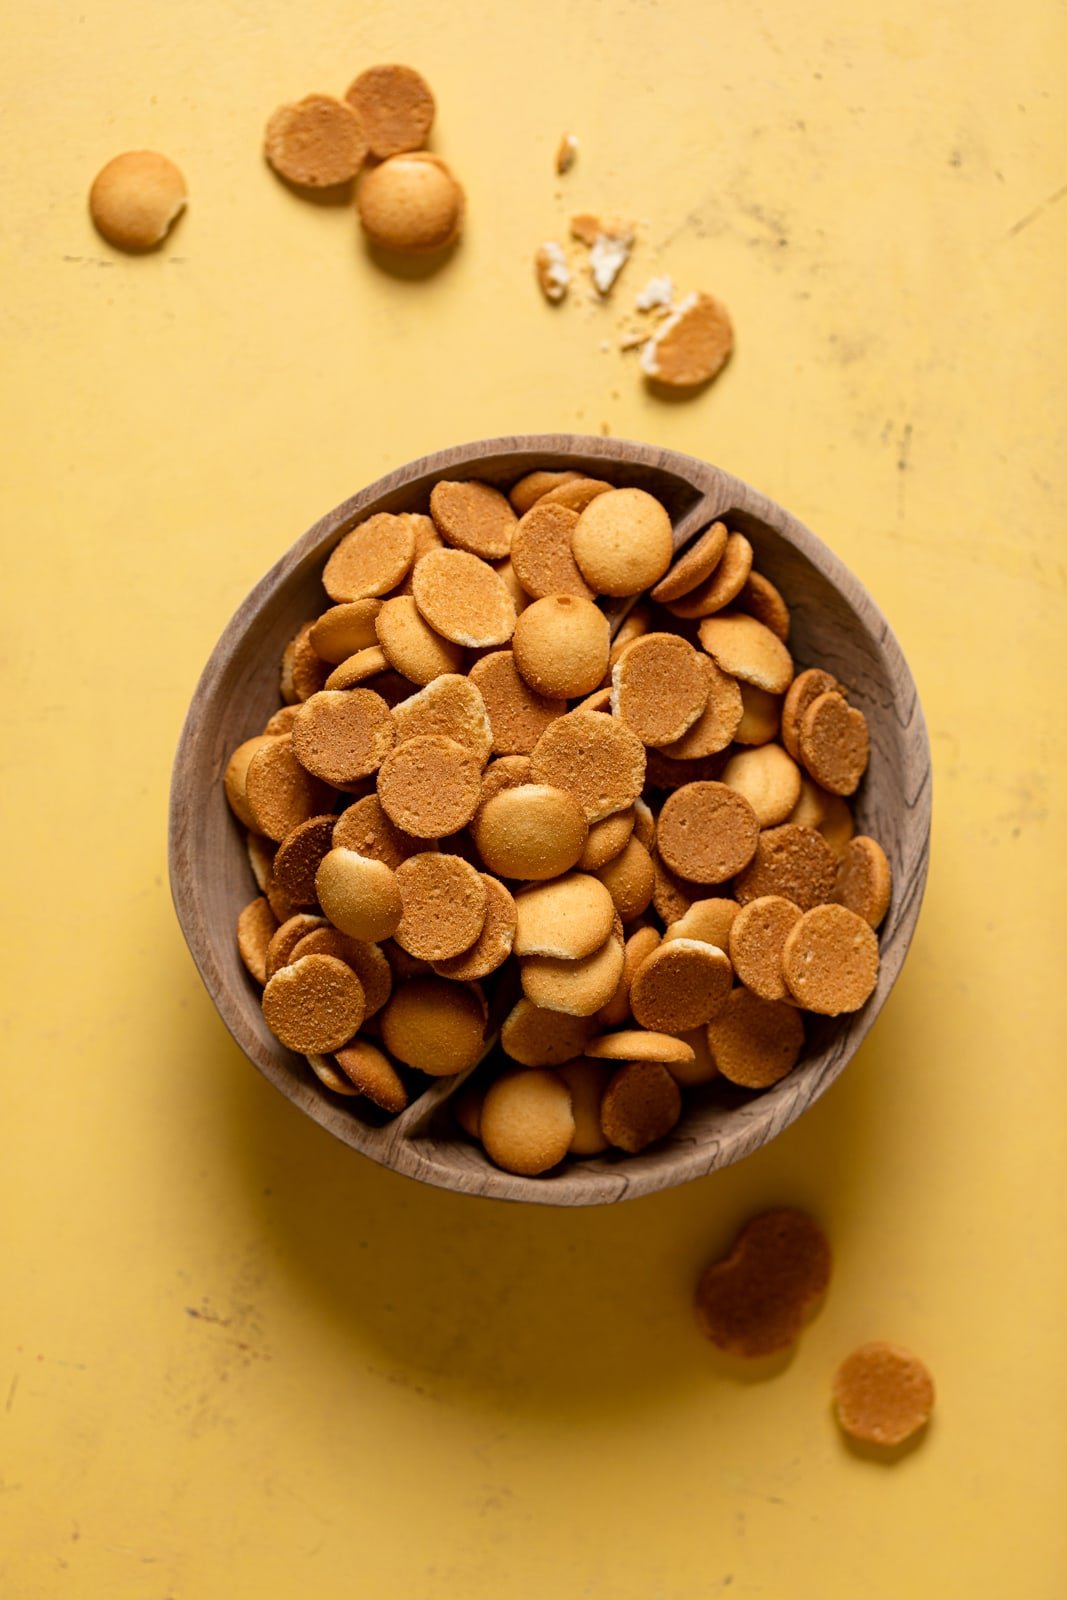 Wooden bowl of Nilla wafers